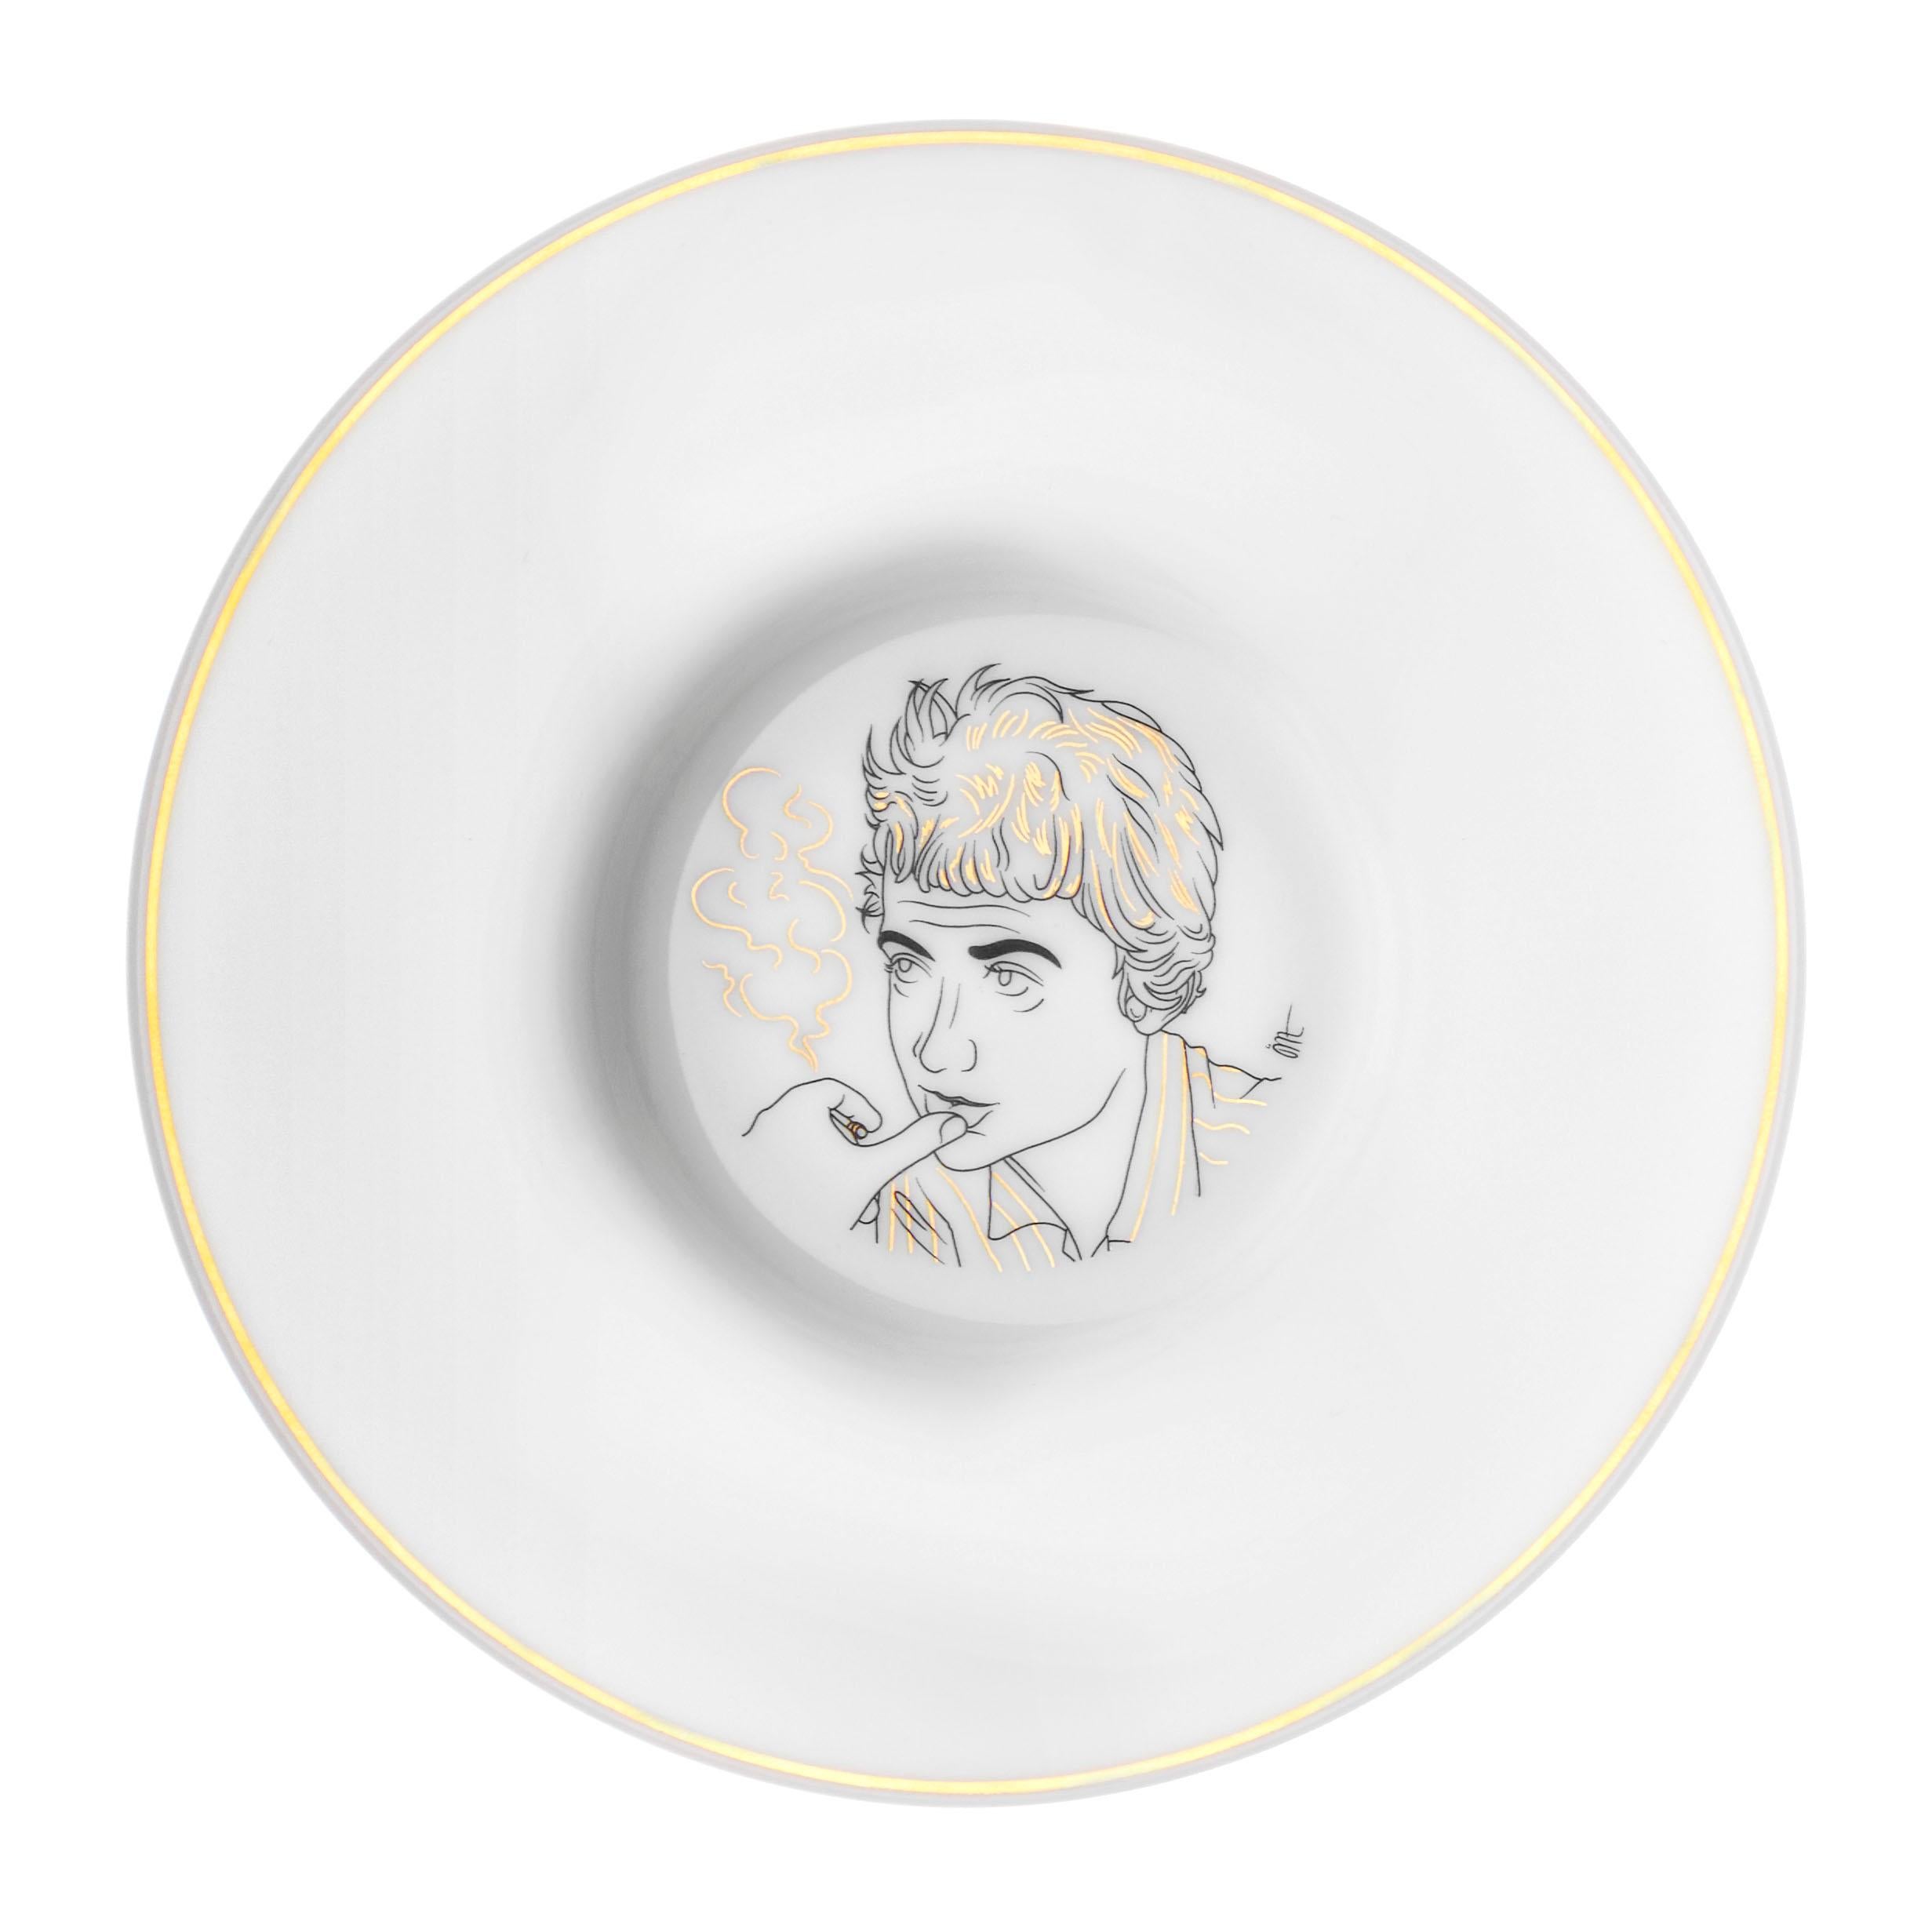 Maison Fragile and the Parisian illustrator artist Jean-Michel Tixier have joined together to create a collection that pays tribute to these men and women, key figures of history, who have made Paris as we know it.

Box of 2 coffee cups and saucers